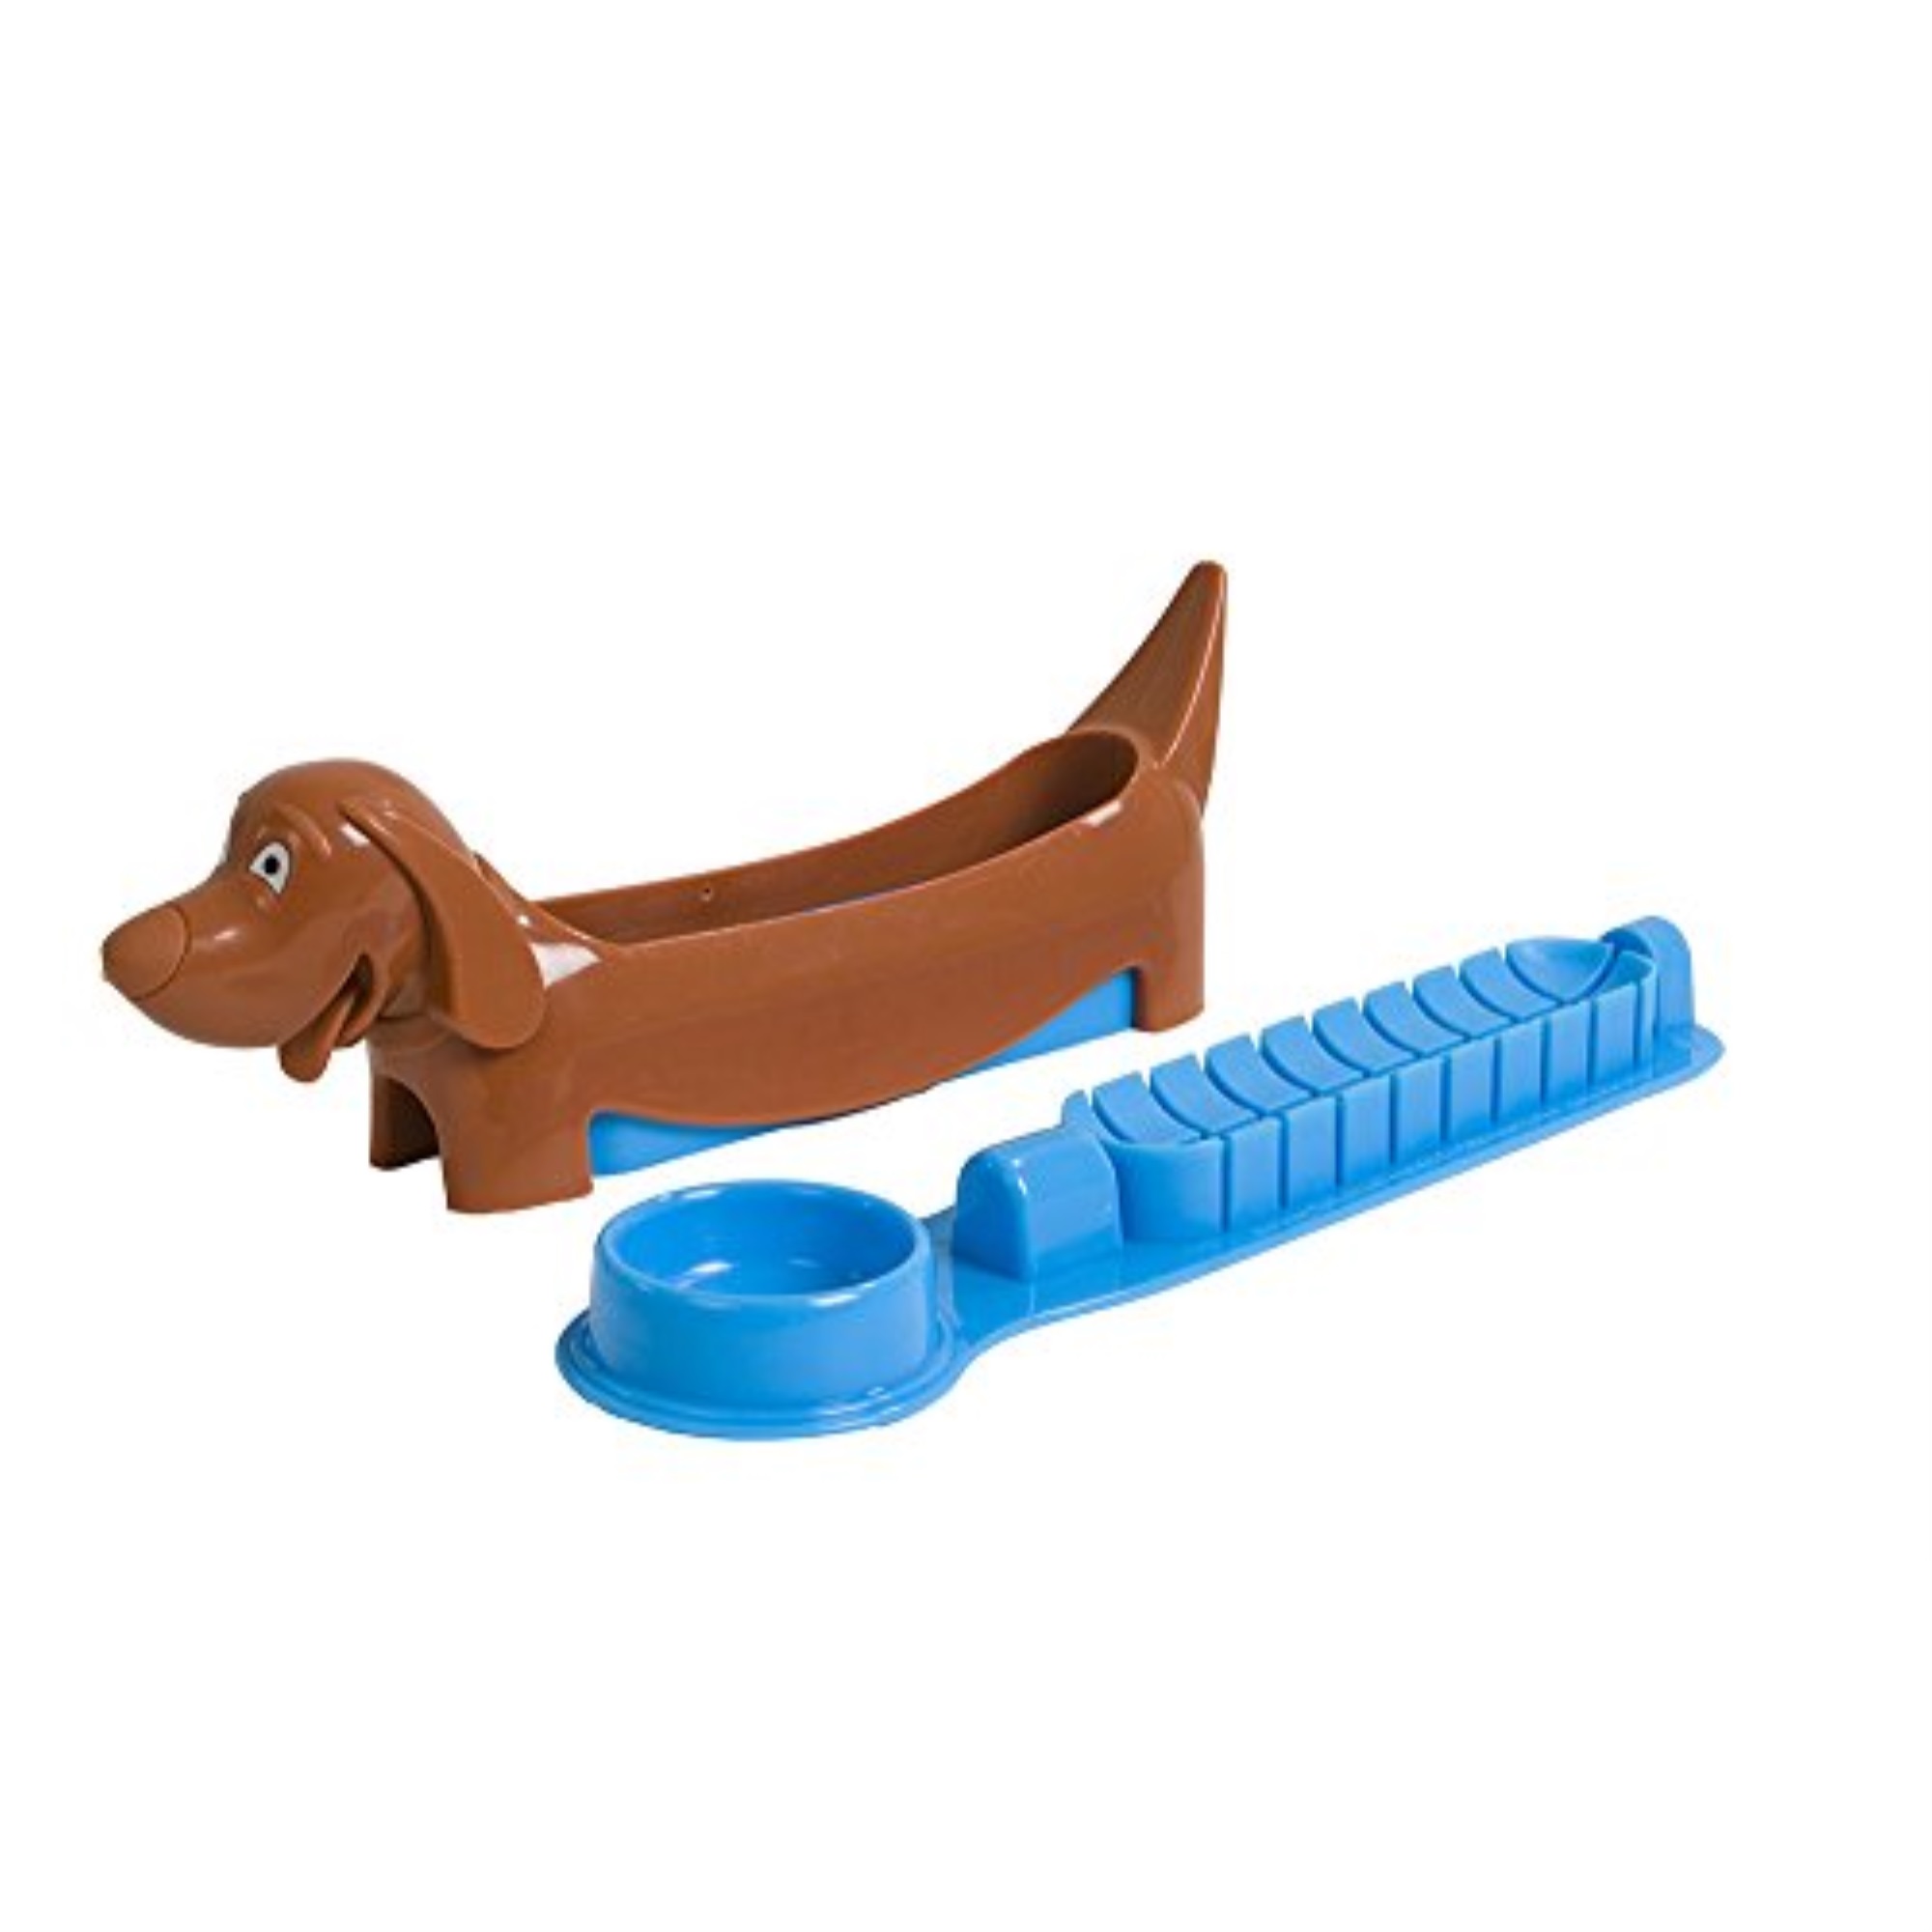 Evriholder, Hot Dog Holder and Slicer Snacks, Fun Lunches for Kids, Colors May Vary-Blue or Green, Standard - image 1 of 2